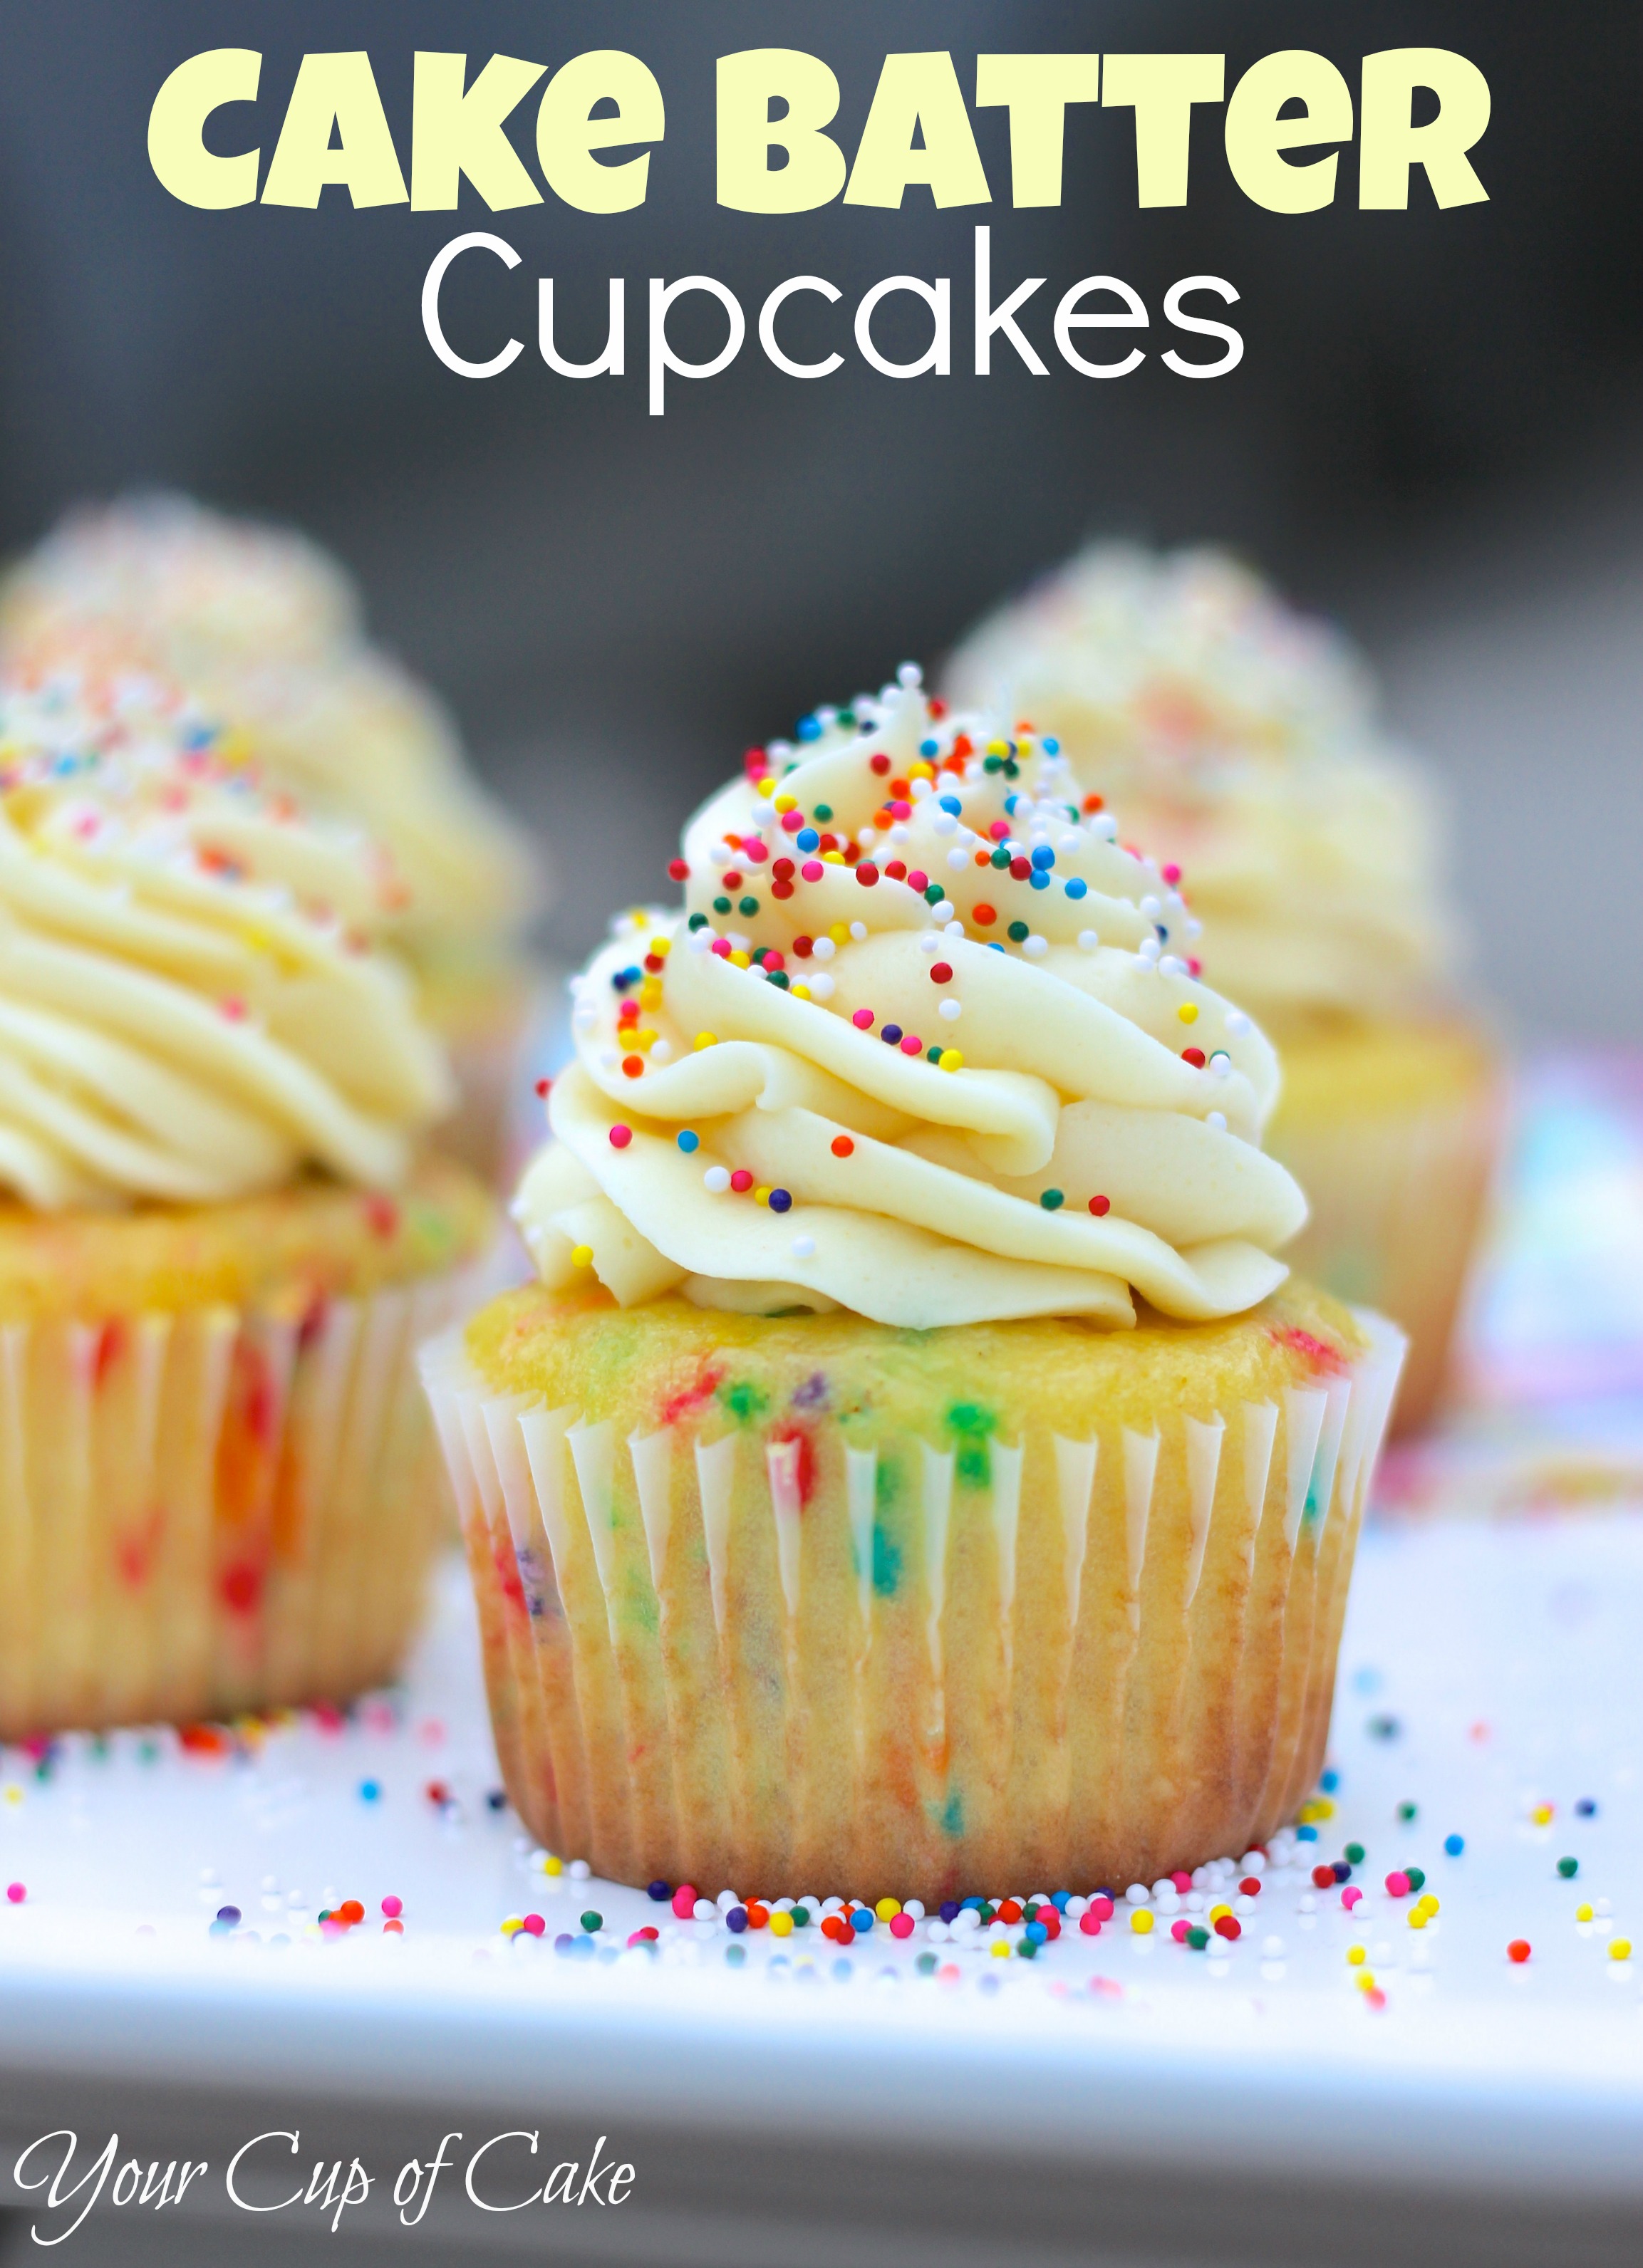 https://www.yourcupofcake.com/wp-content/uploads/2012/10/Cake-Batter-Cupcakes.jpg